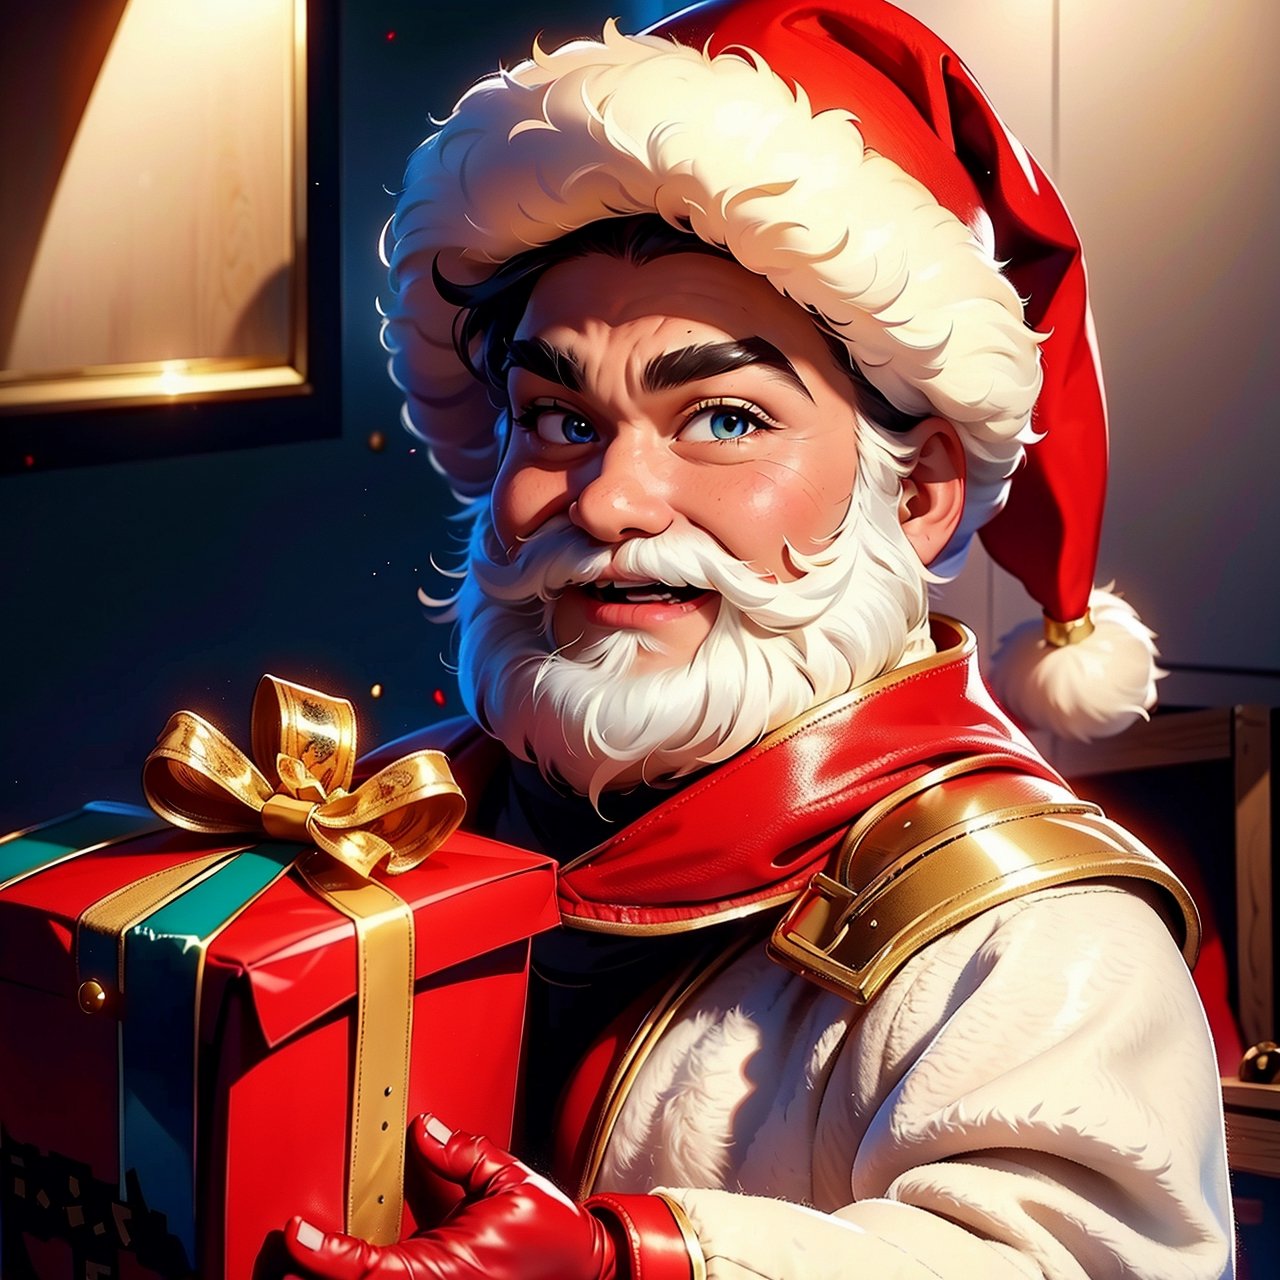 (best quality,4k,8k,highres,masterpiece:1.2),ultra-detailed,(realistic,photorealistic,photo-realistic:1.37),anime-style,3d realistic,character:Santa Claus,cute rounded eyes,rosy cheeks,white detailed beard,pinkish round chubby face,round nose with slight blush,cartoonish eyebrows and eyelashes,male character,kind smile,wearing a red and white furry hat,wearing a red and white furry suit with golden buckles,wearing black boots with fur trim,holding a large bag of gifts over his shoulder